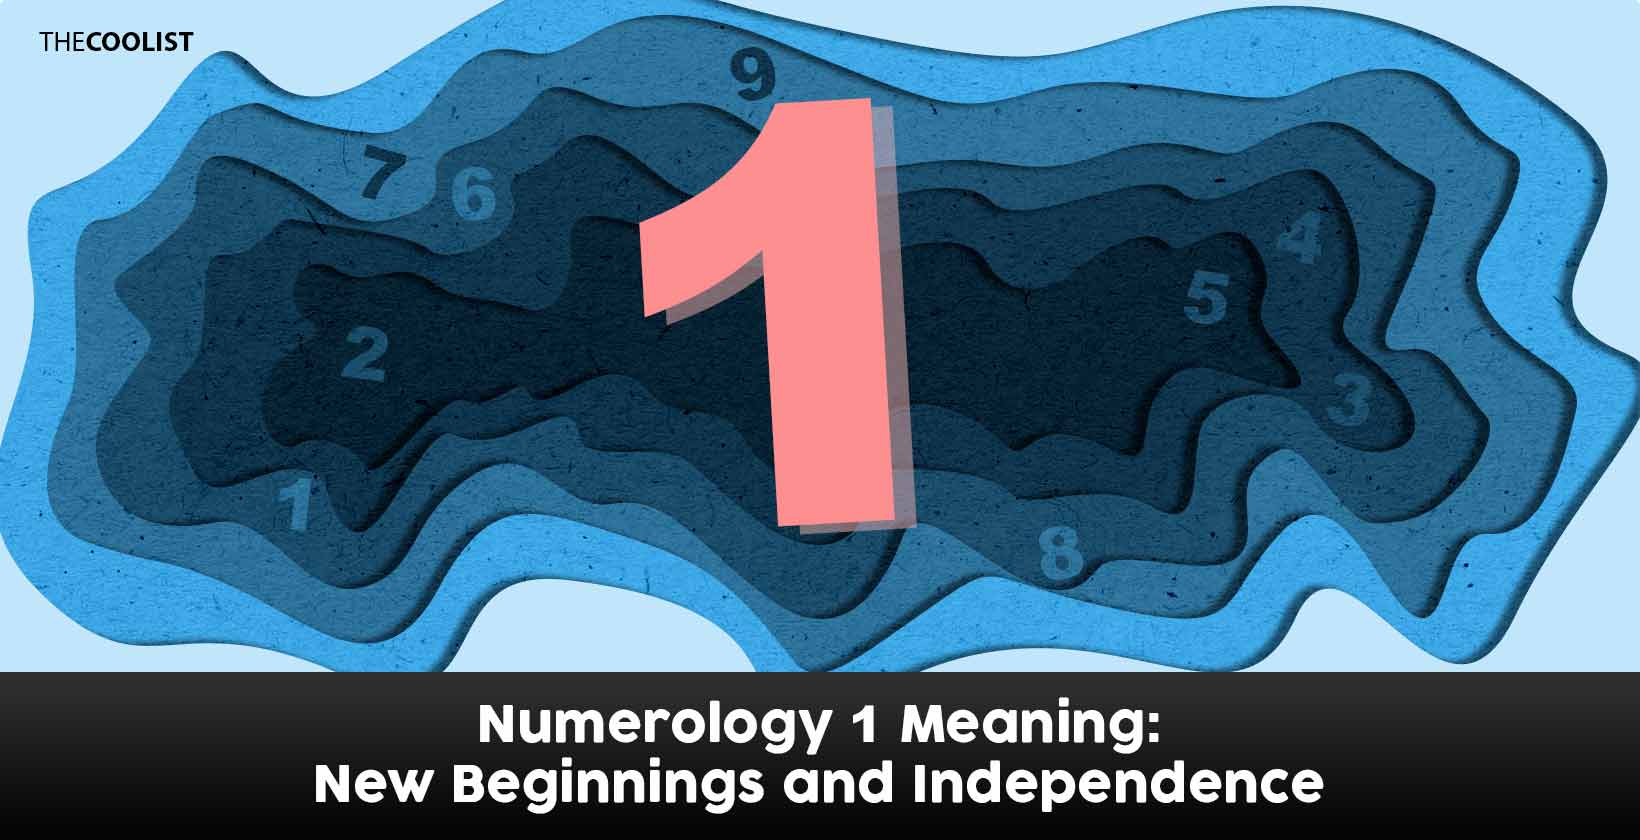 Numerology 1 Meaning